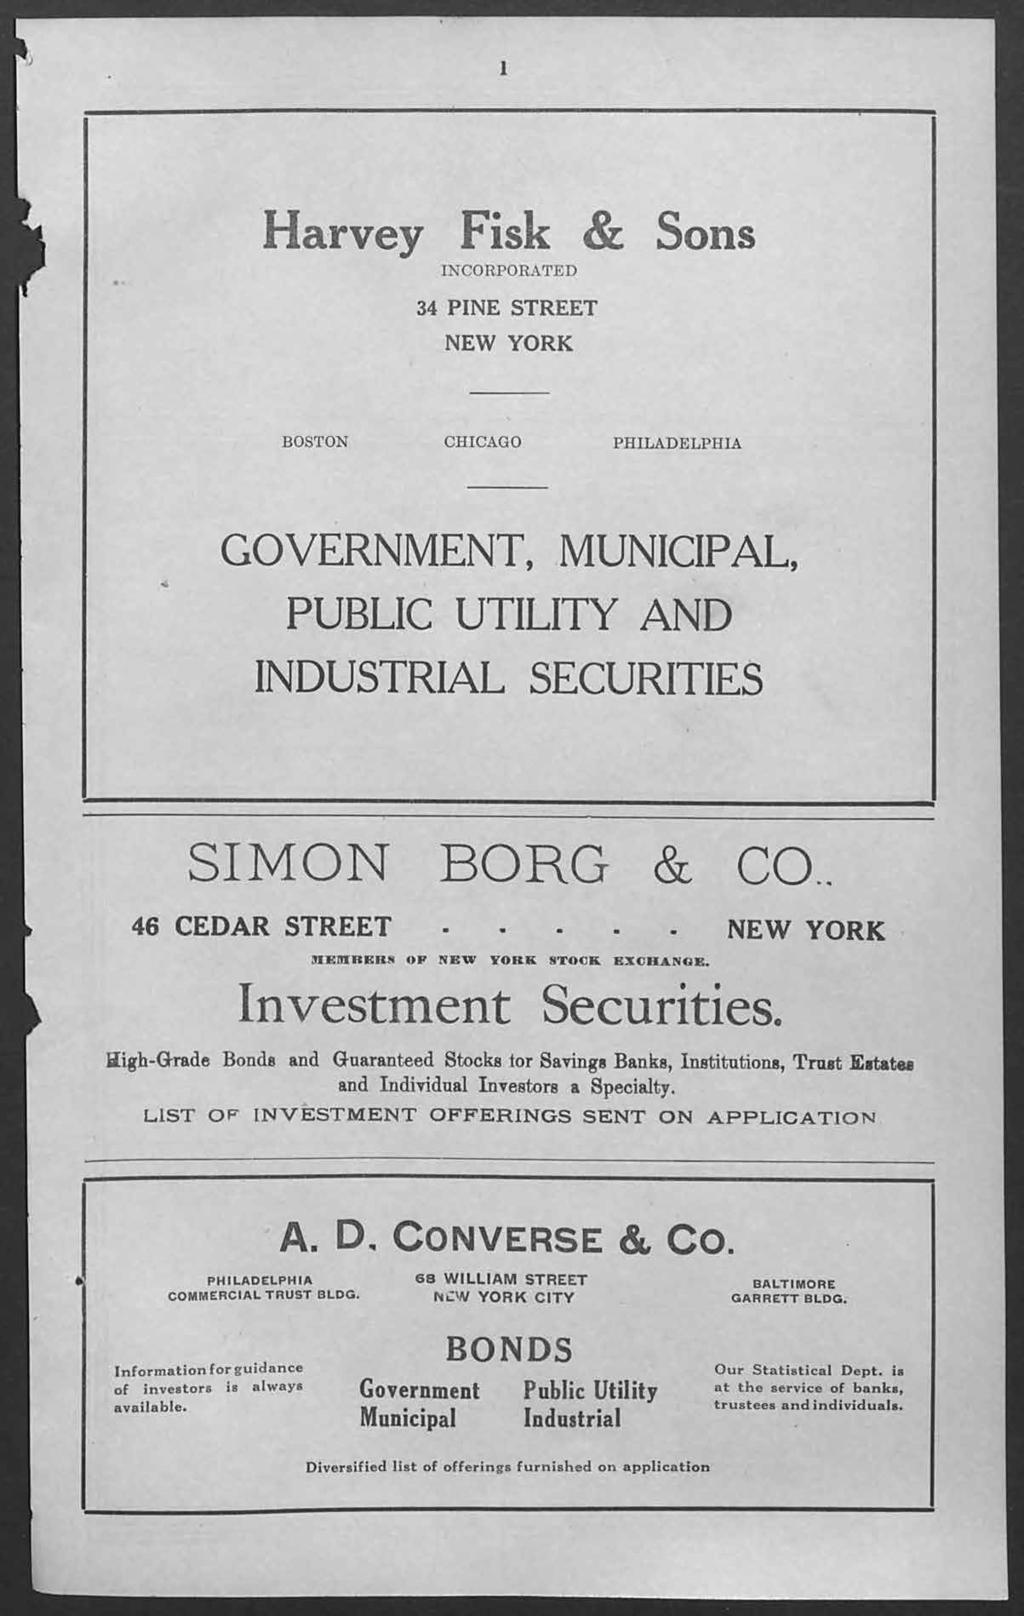 1 Harvey Fisk & Sons INCORPORATED 34 PINE STREET NEW YORK BOSTON CHICAGO PHILADELPHIA GOVERNMENT, MUNICIPAL, PUBLIC UTILITY AND INDUSTRIAL SECURITIES SIMON BORG & CO.